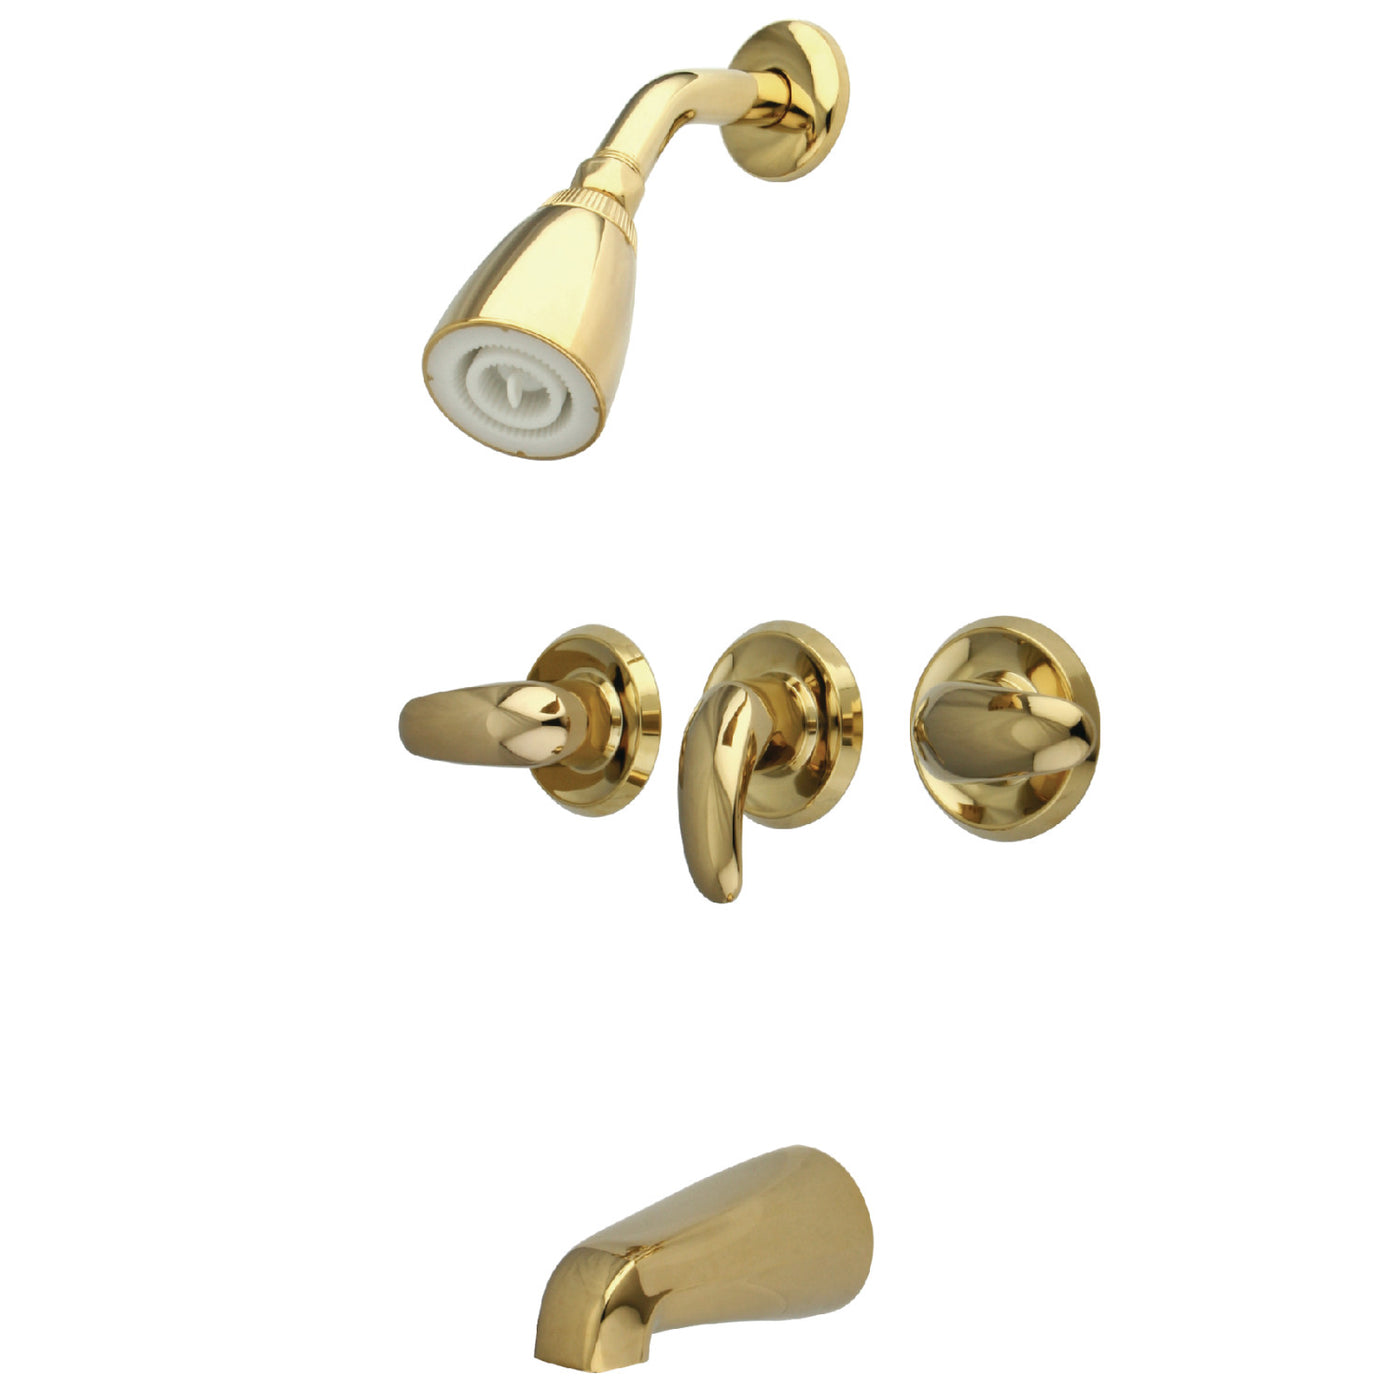 Elements of Design EB6232LL Tub and Shower Faucet, Polished Brass